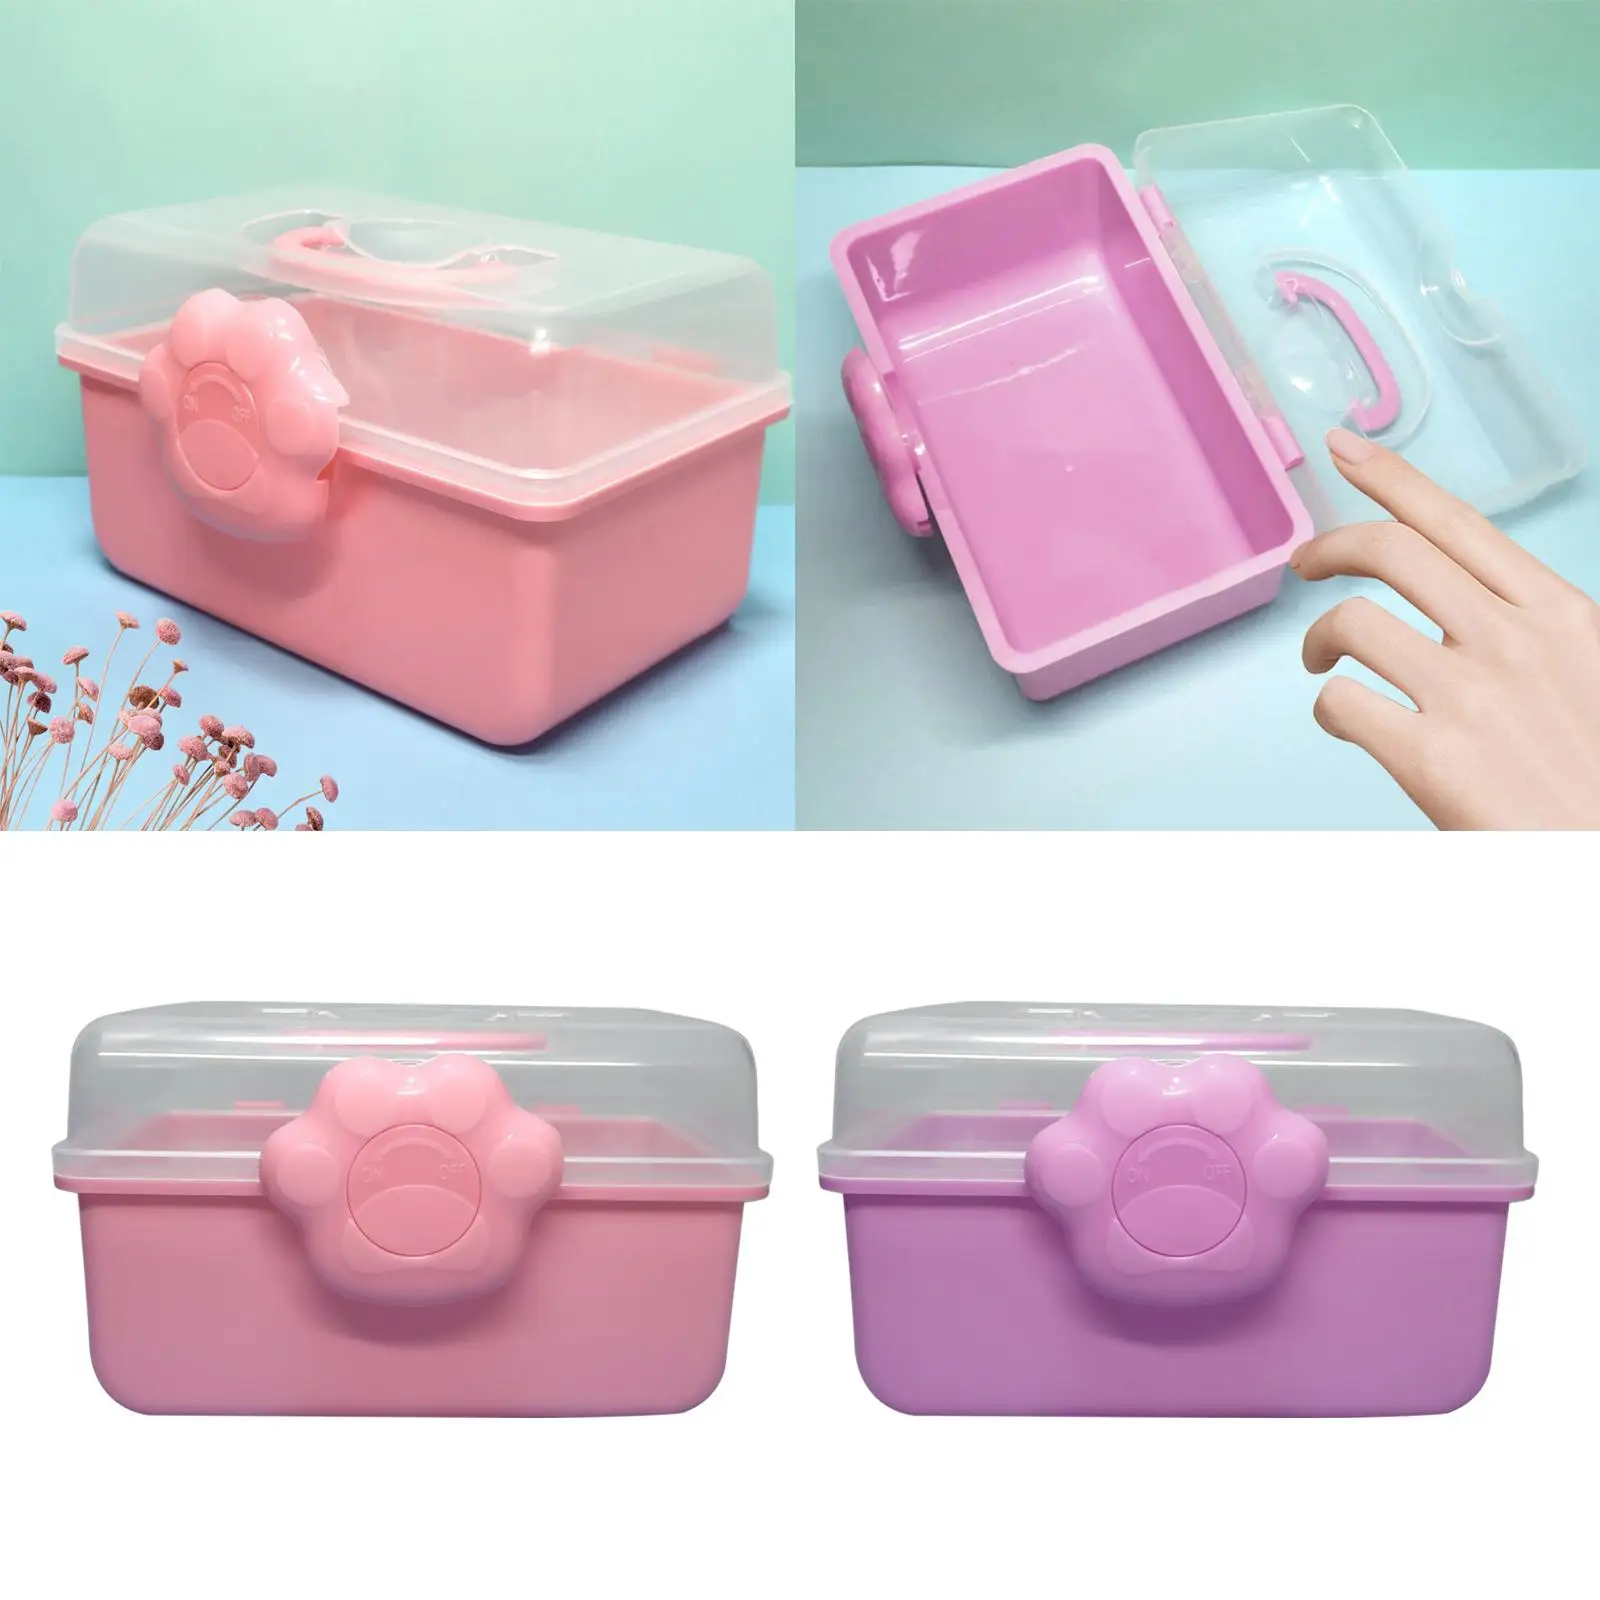 Hair Accessory Storage Case Double Layer Storage Box Display Case Sewing Box Organizer for Hair Clips Tools Cosmetics Toys